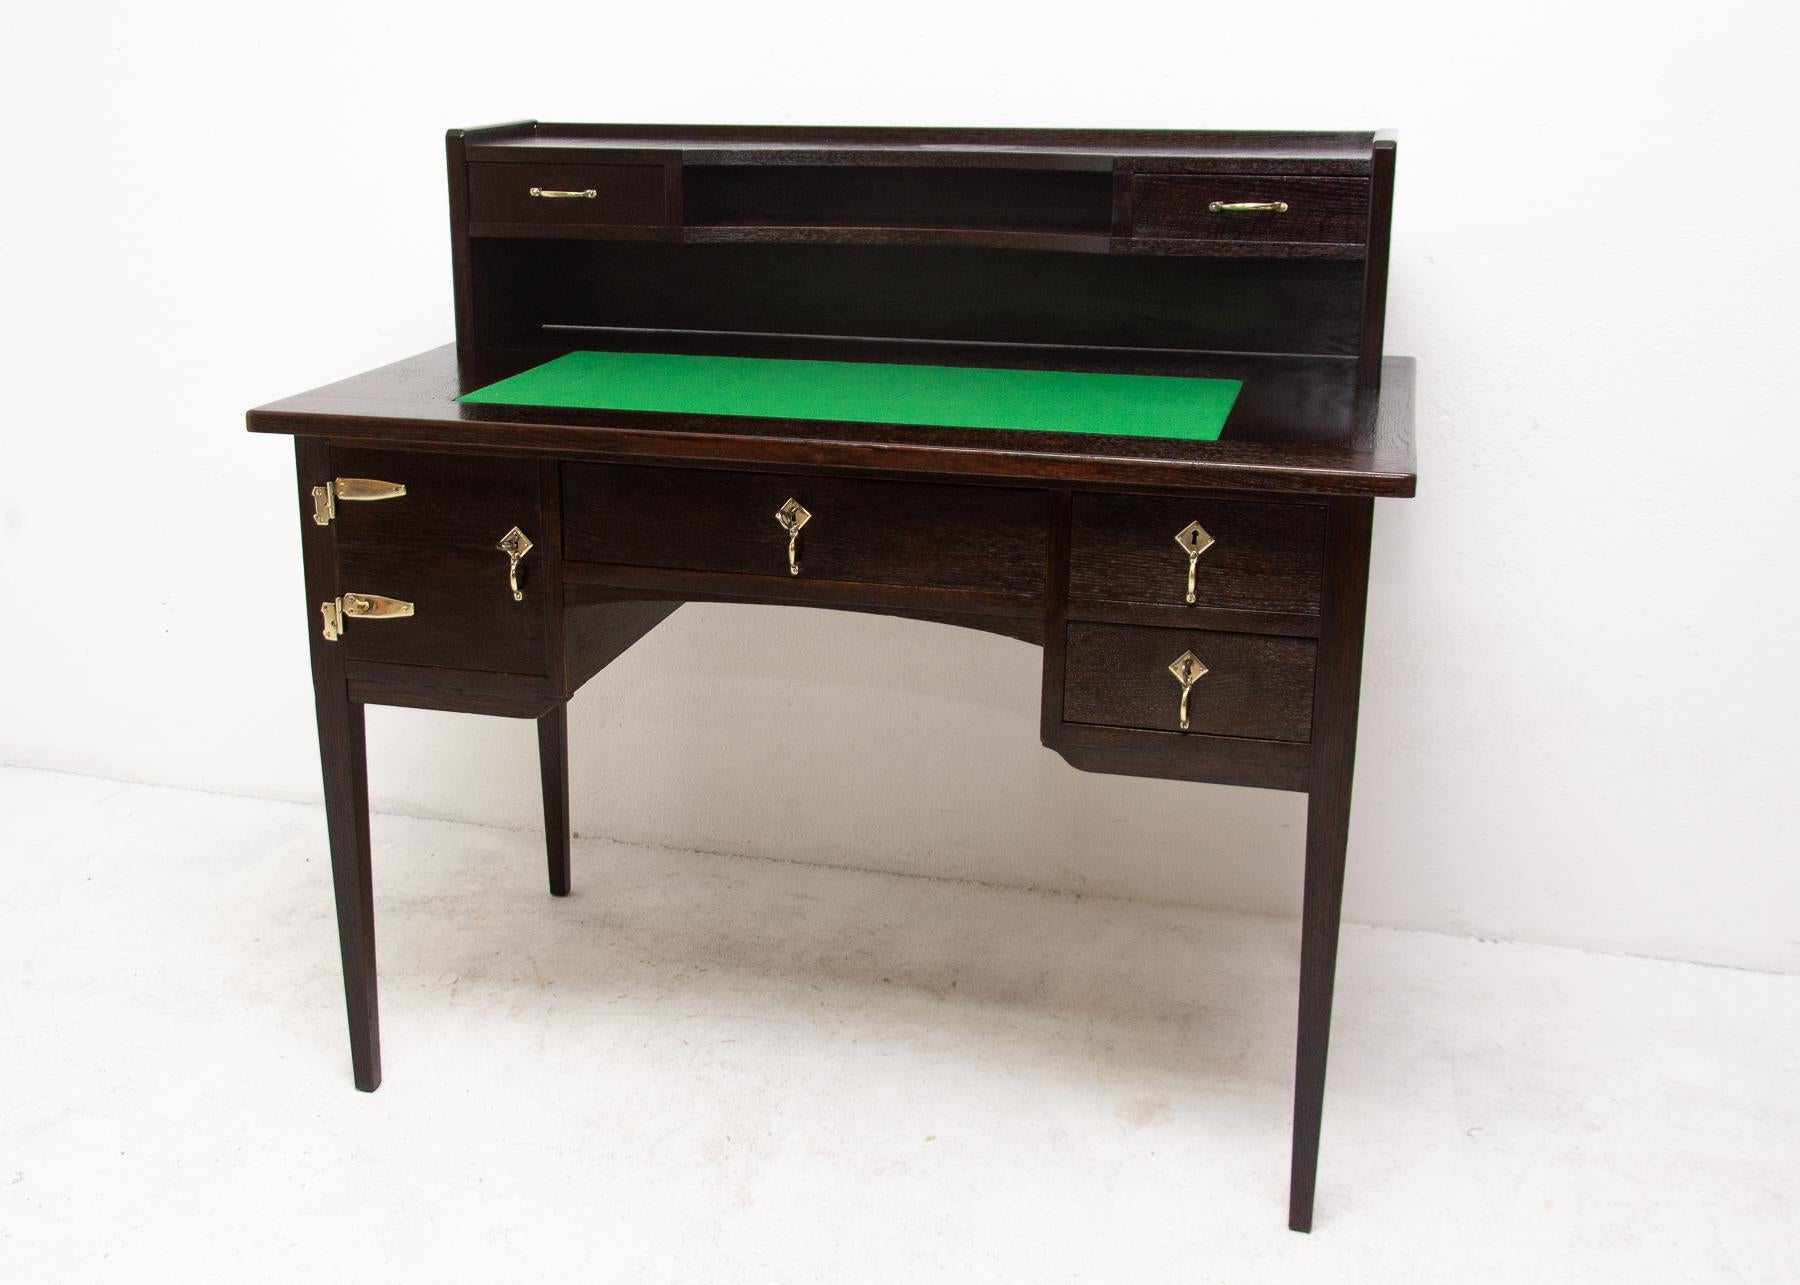 Early 20th Century Viennese Secession Ladies Writing Desk with Armchair (Österreichisch)